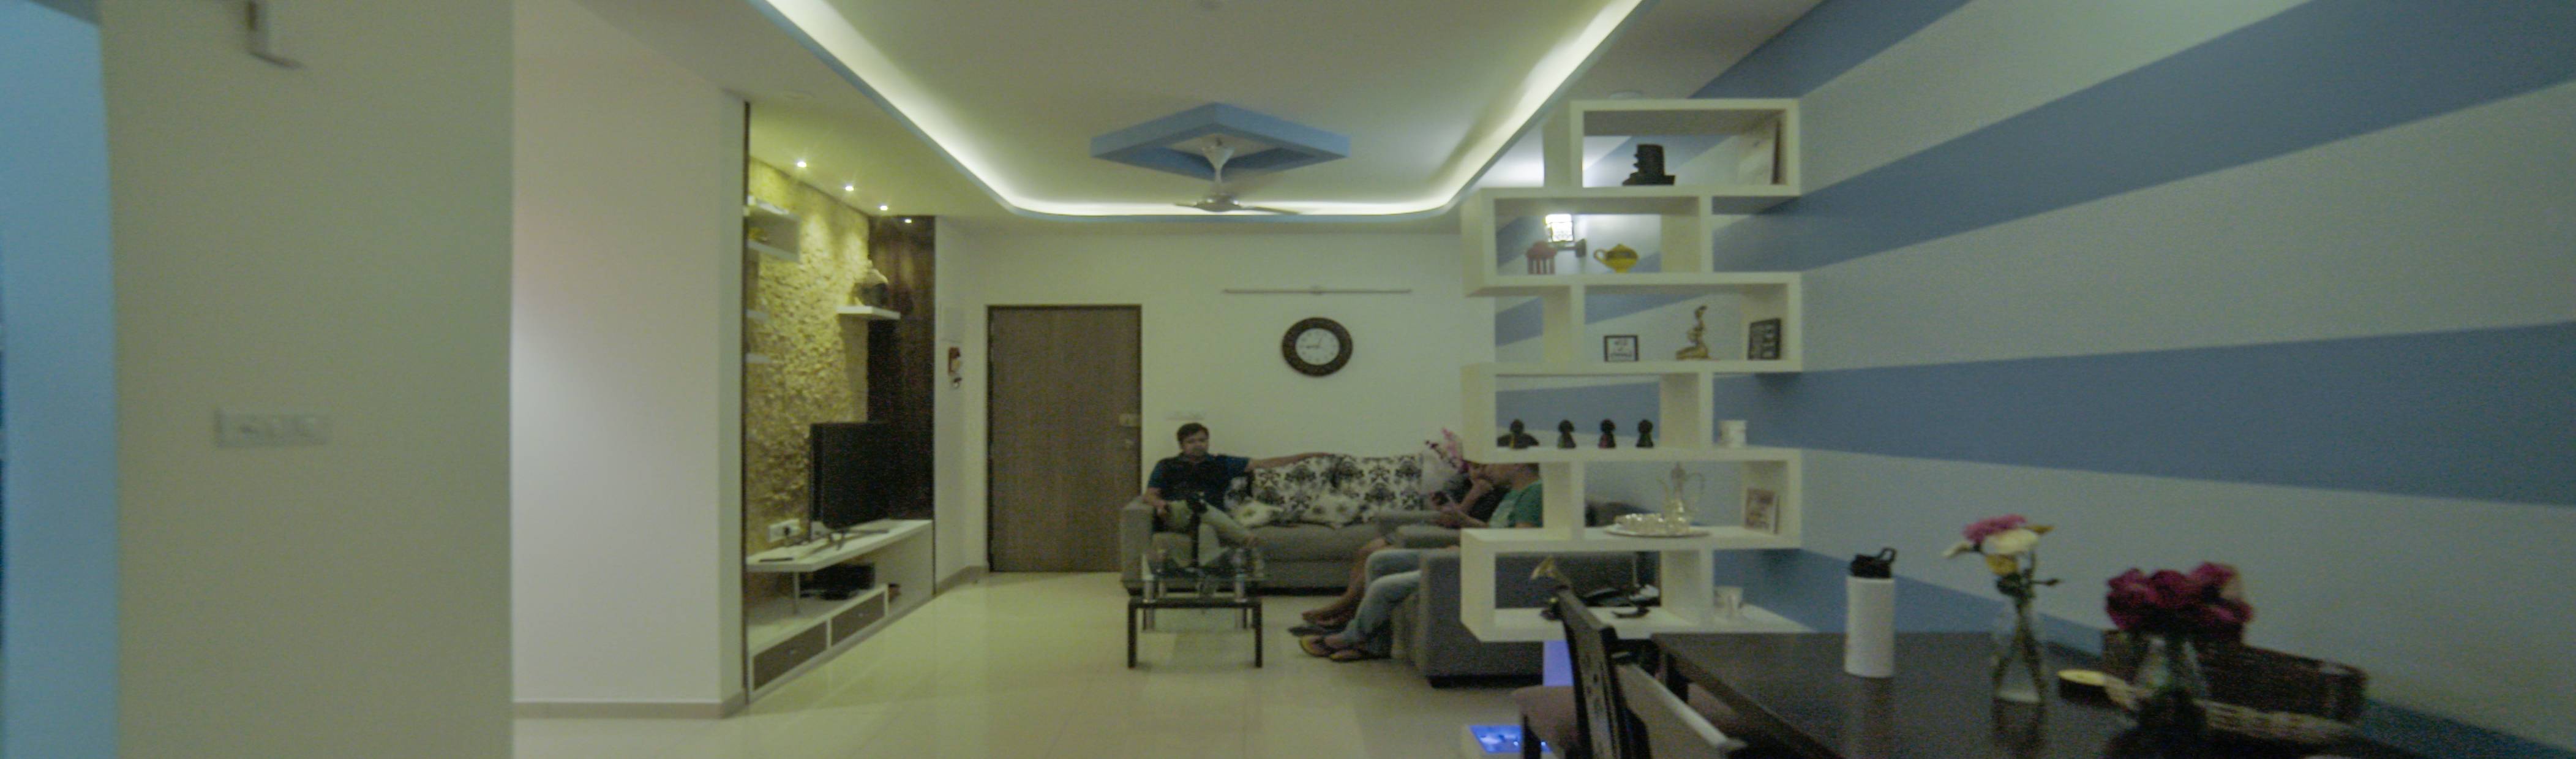 Flat Interior Design With False Ceiling And Painting At Sobha